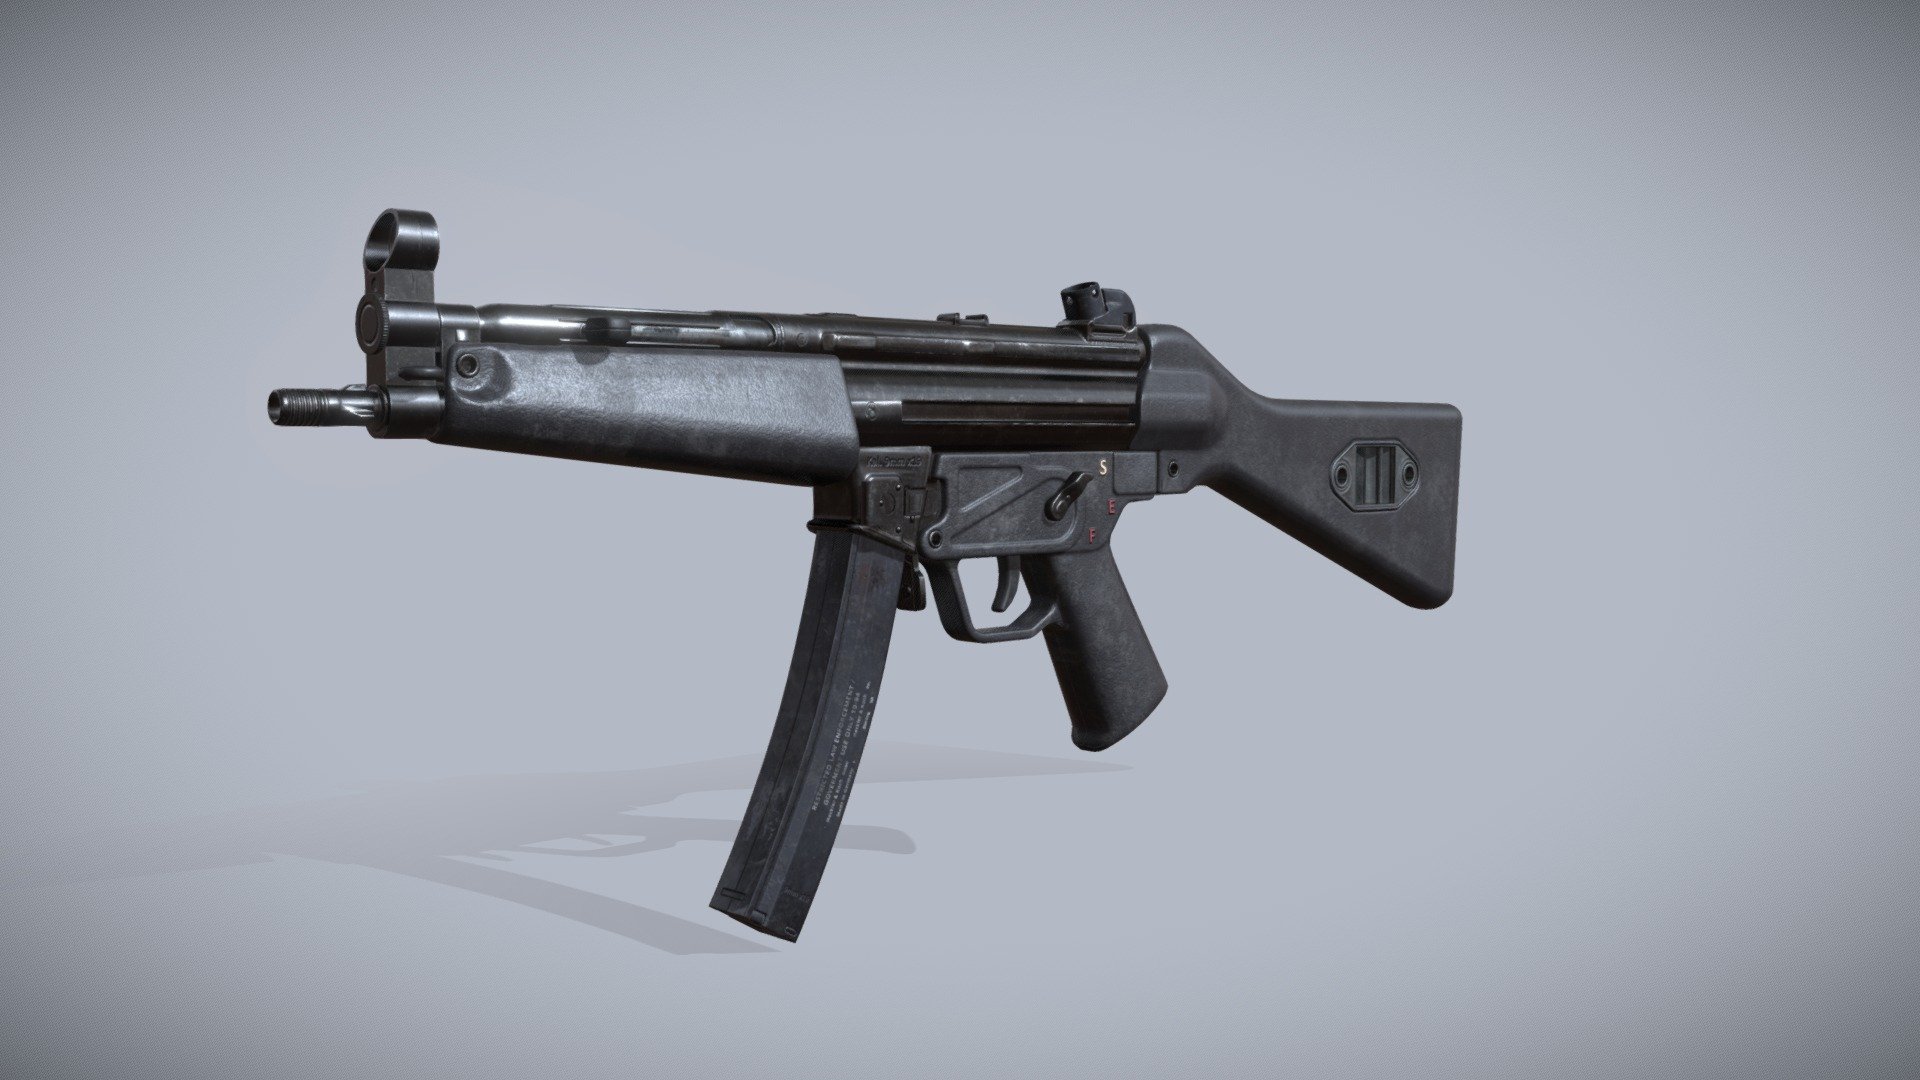 I'm excited to share my latest project a game-ready 3D model of the iconic HK MP5 submachine gun. The journey of bringing this firearm to life was all about precision. Dive into the photorealistic 4K textures and the 16K vertices optimized for game engines.
Also checkout my Artstation and support me for more.
Download and enjoy! - HK MP5 SMG - Download Free 3D model by Daniel Zamary (@dani-zzz) 3d model